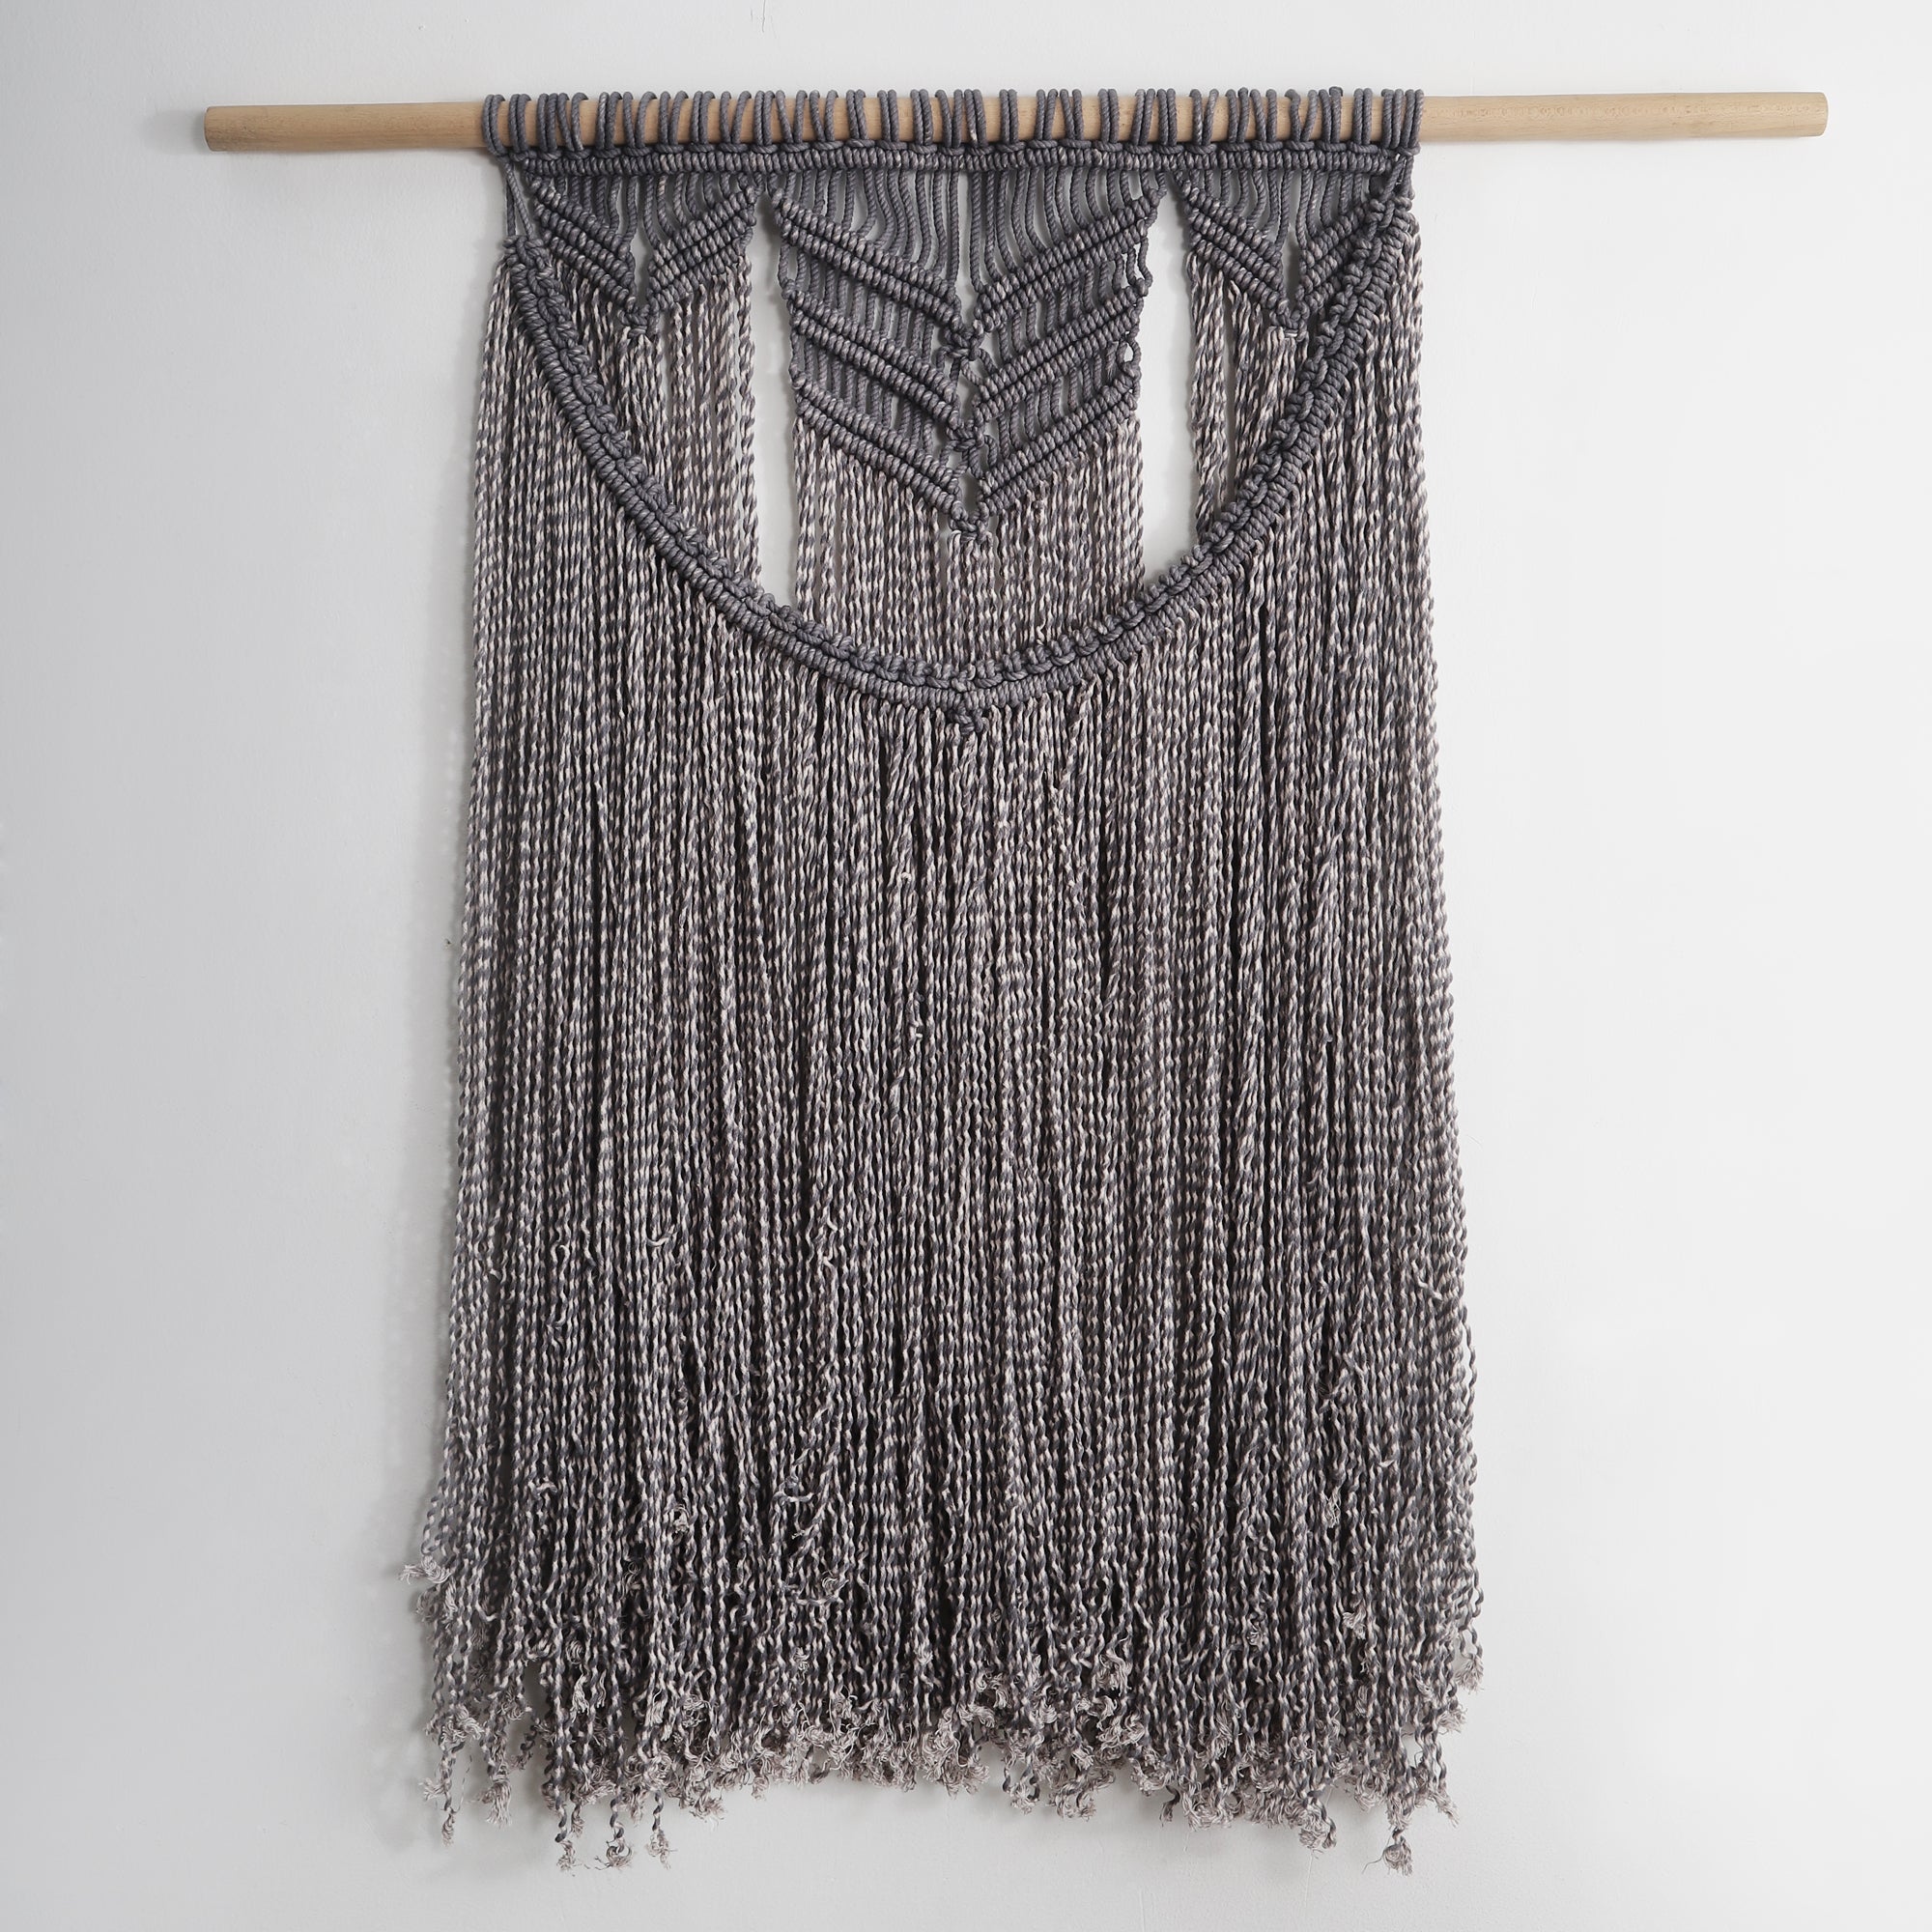 Handcrafted Macrame Wall Hanging